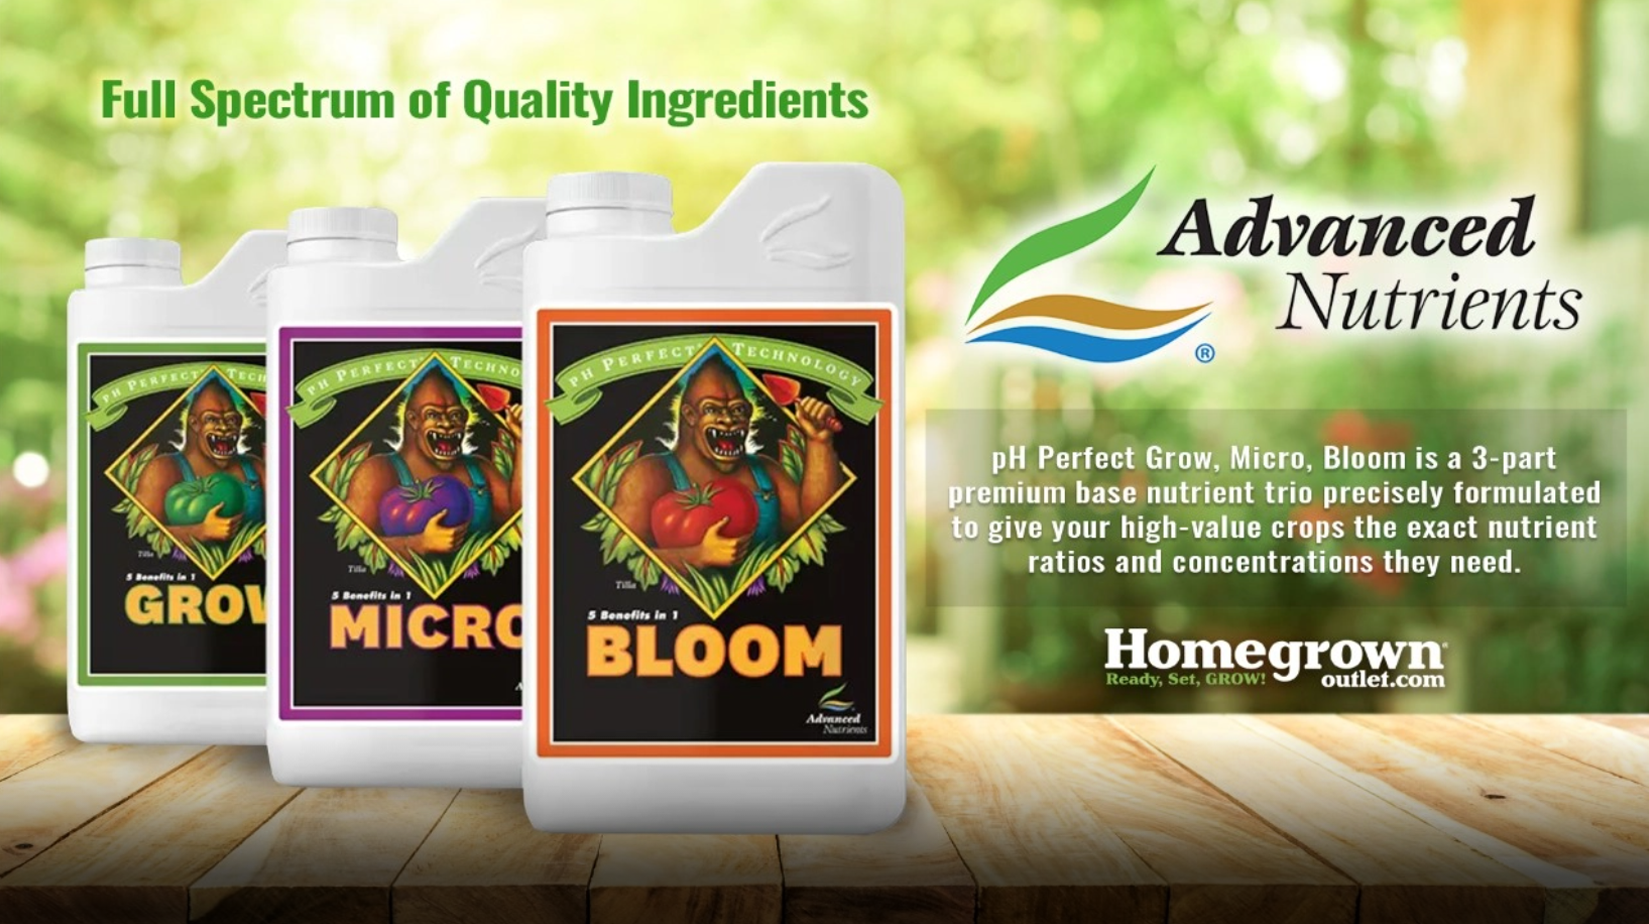 Advanced Nutrients - bottles of liquid nutrients for plants